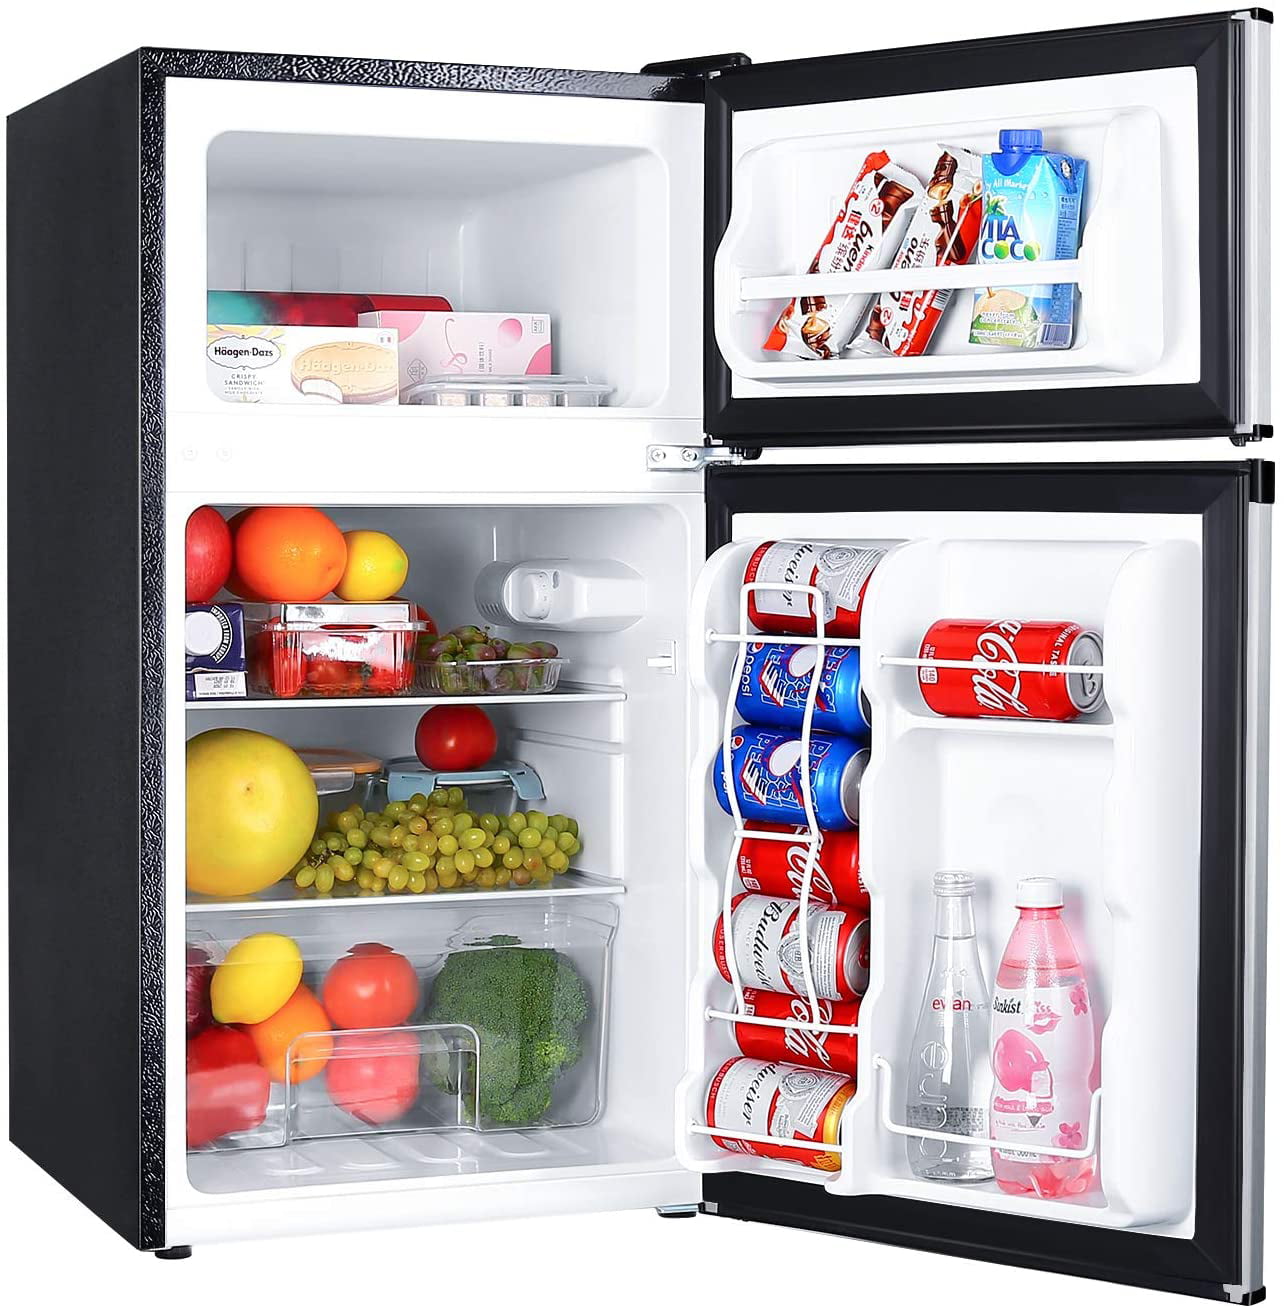 TACKLIFE Compact Refrigerator 3.2 Cu.Ft, 2 Door Mini Fridge with Freezer, Stainless Steel Silver